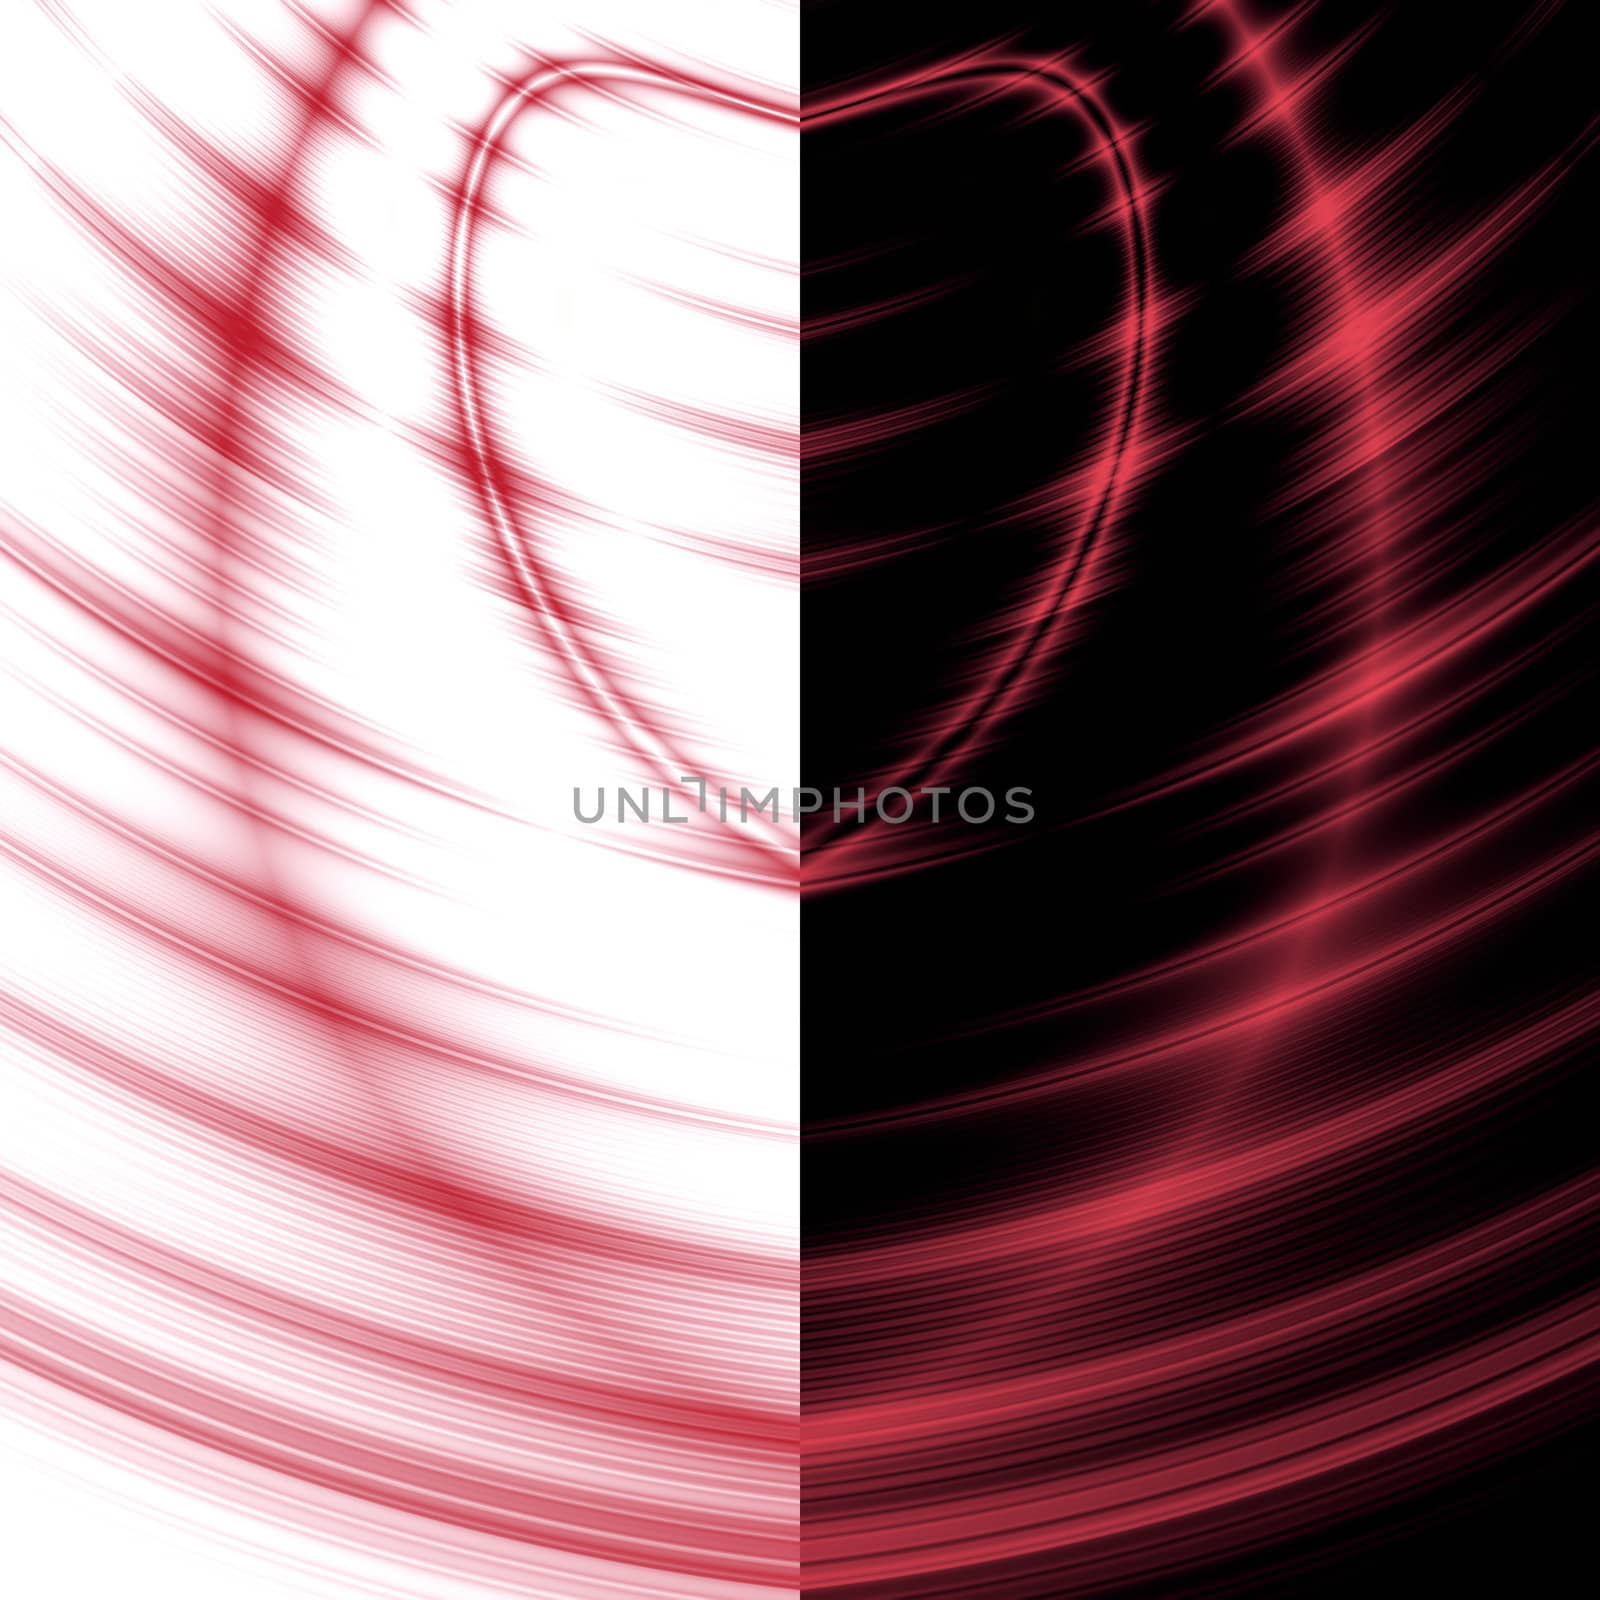 red waves of heart on a contrast white-black background